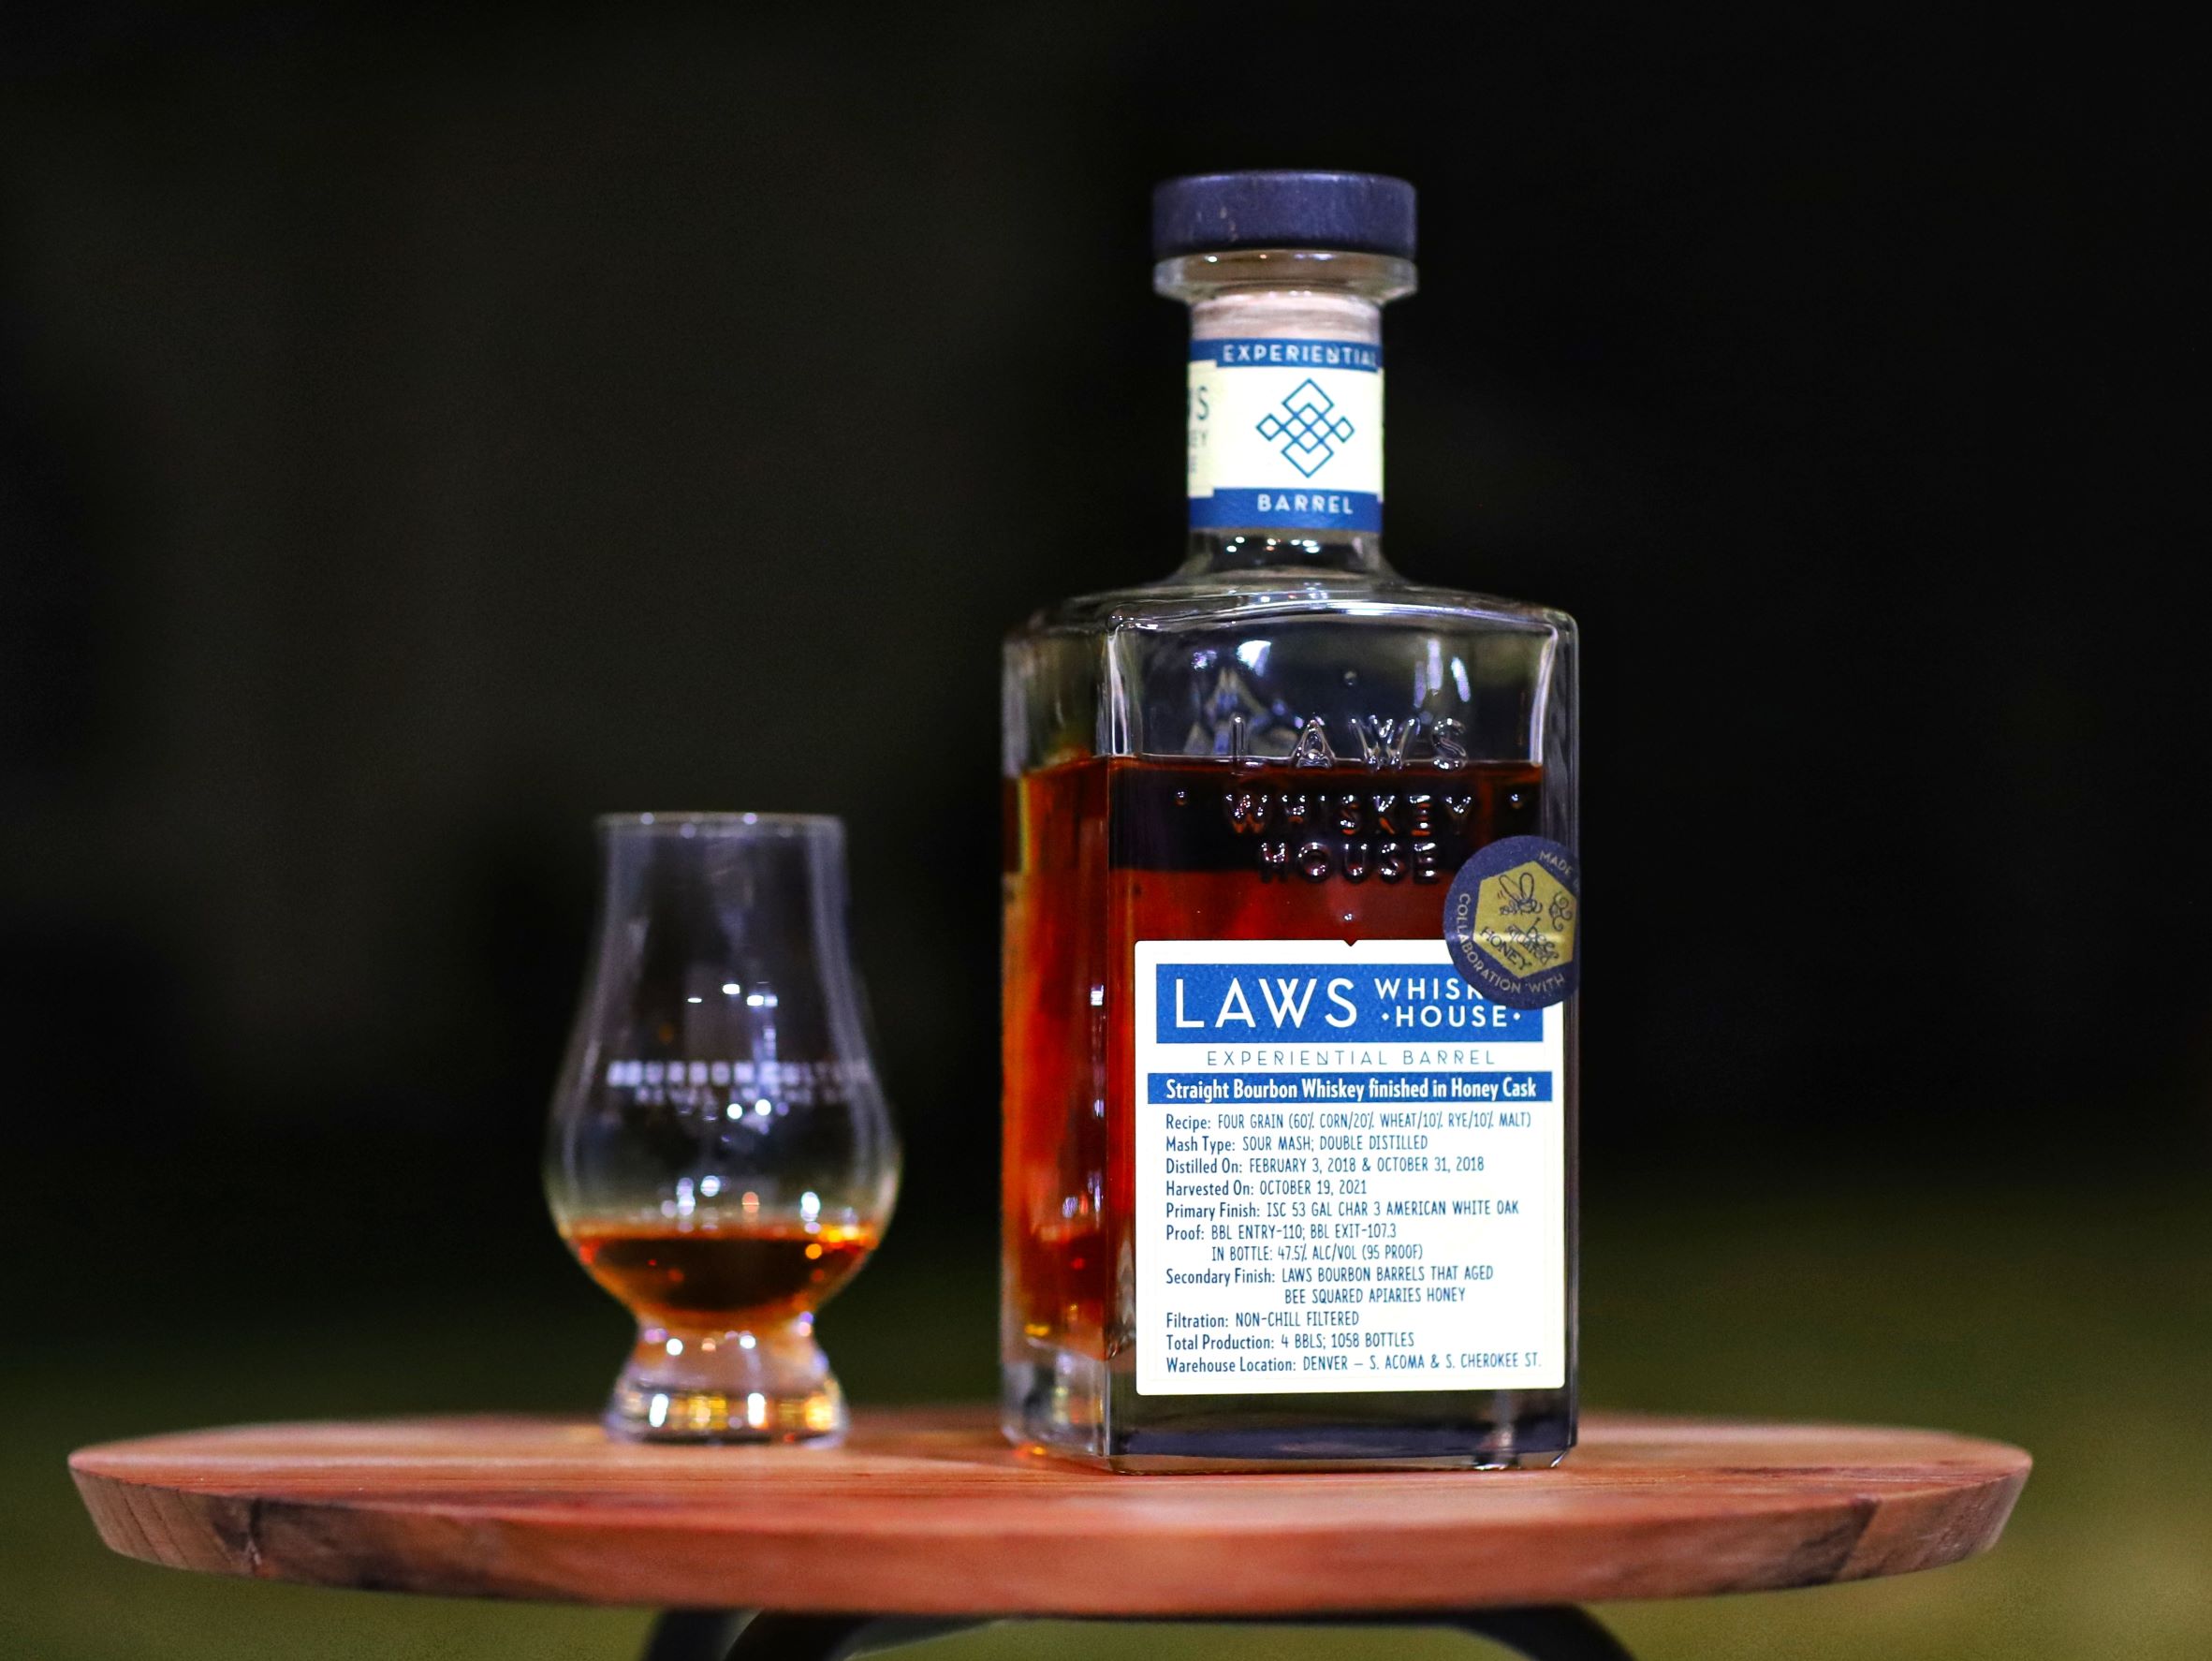 Laws Whiskey House Experimental Barrel Straight Bourbon finished in Honey Cask